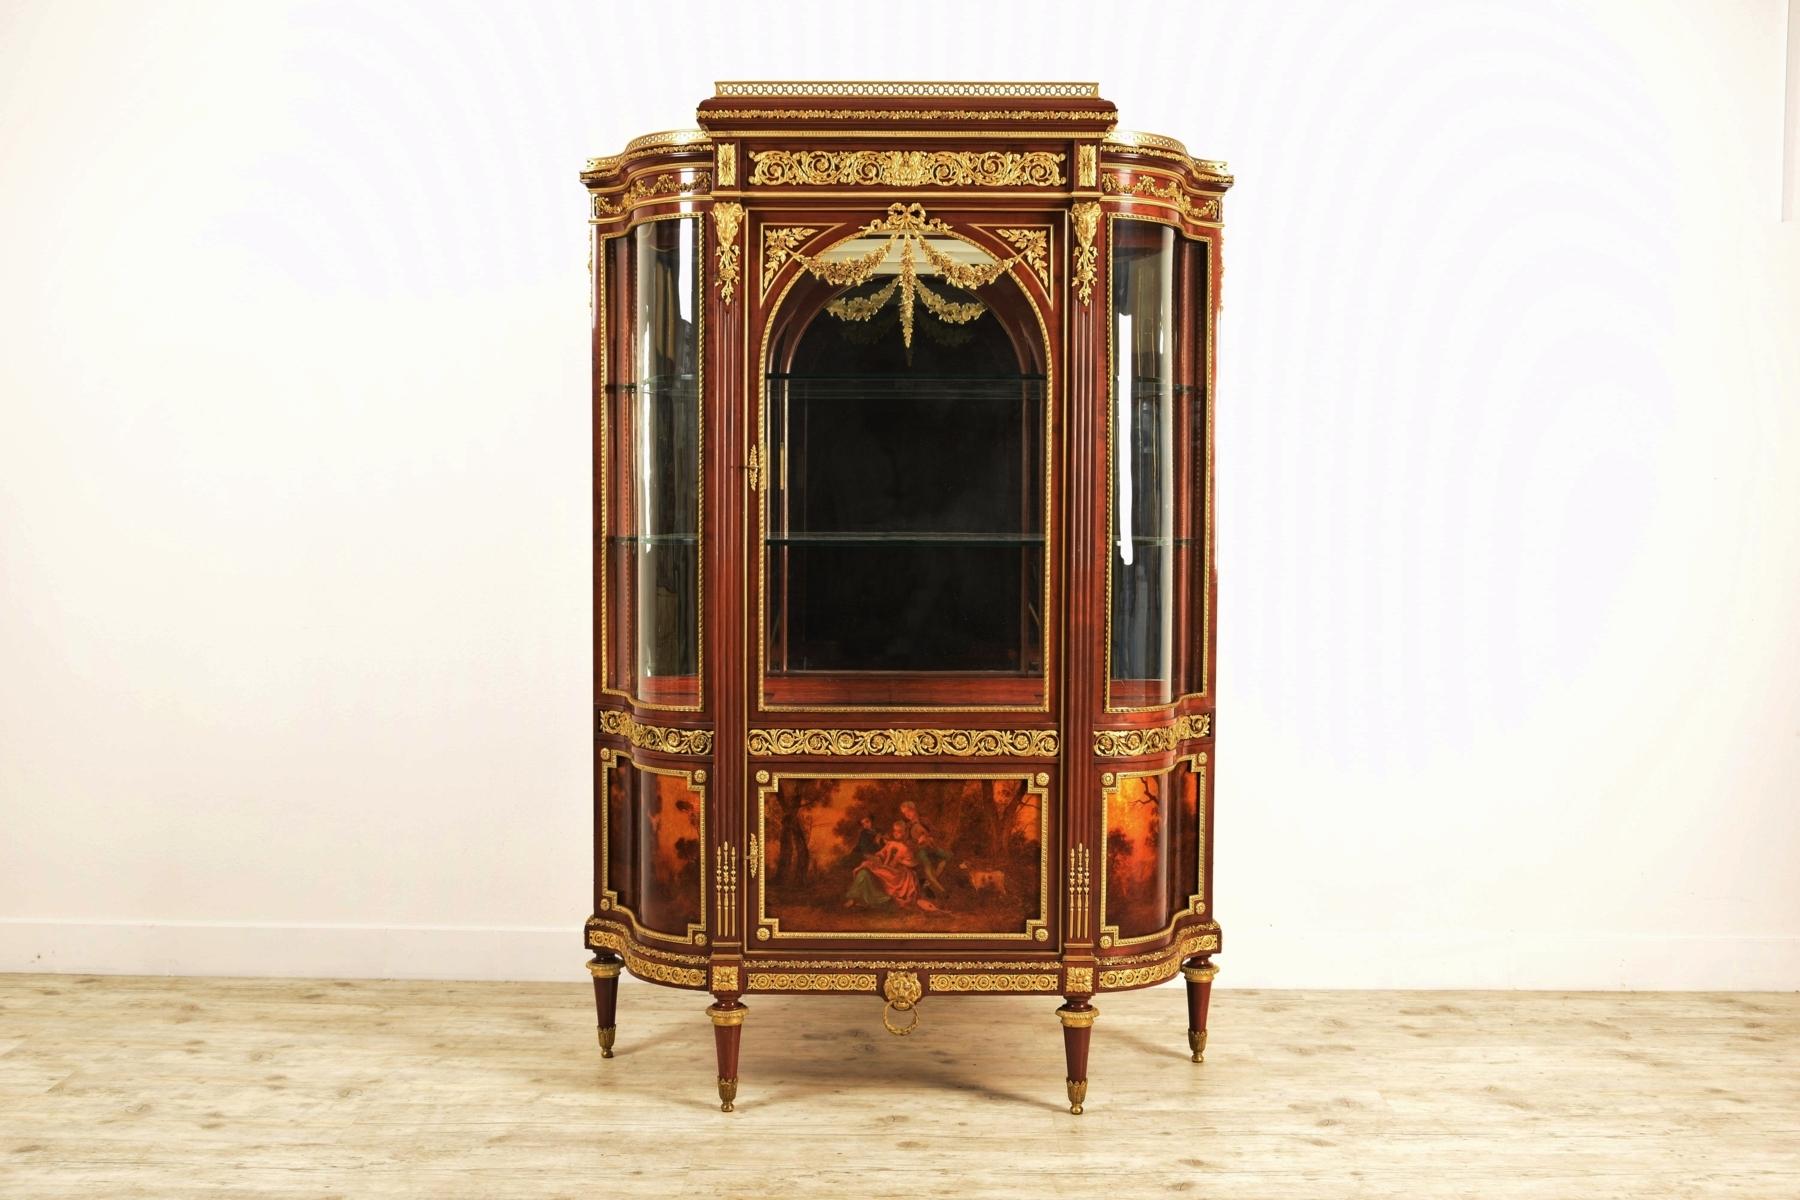 The splendid showcase vitrine, made of solid wood, dates back to the end of the 19th century. Made in France by a master cabinet maker of great ability, it’s in Louis XVI style.
The furniture is embellished with decorations in ormolu bronze of very